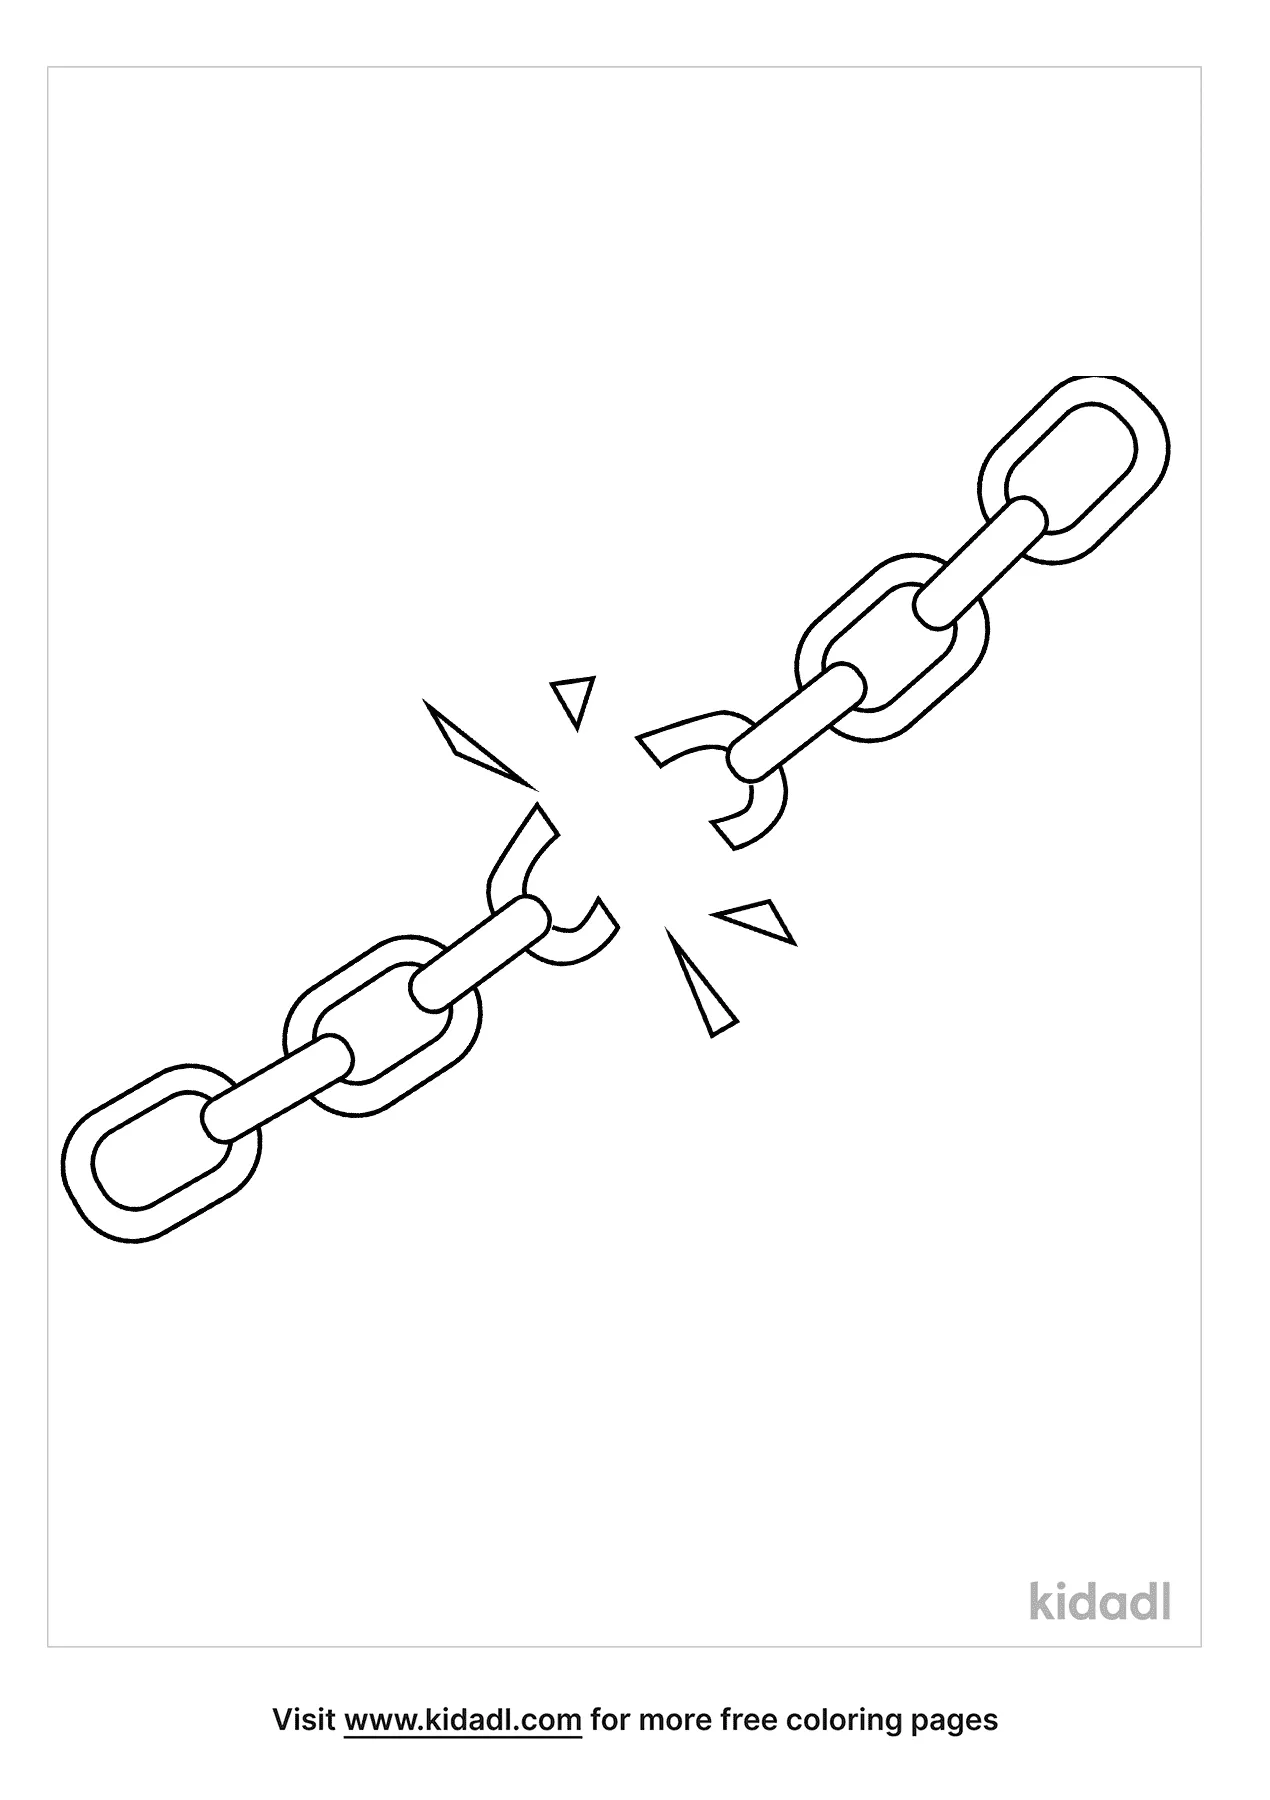 Chains Breaking Coloring Page